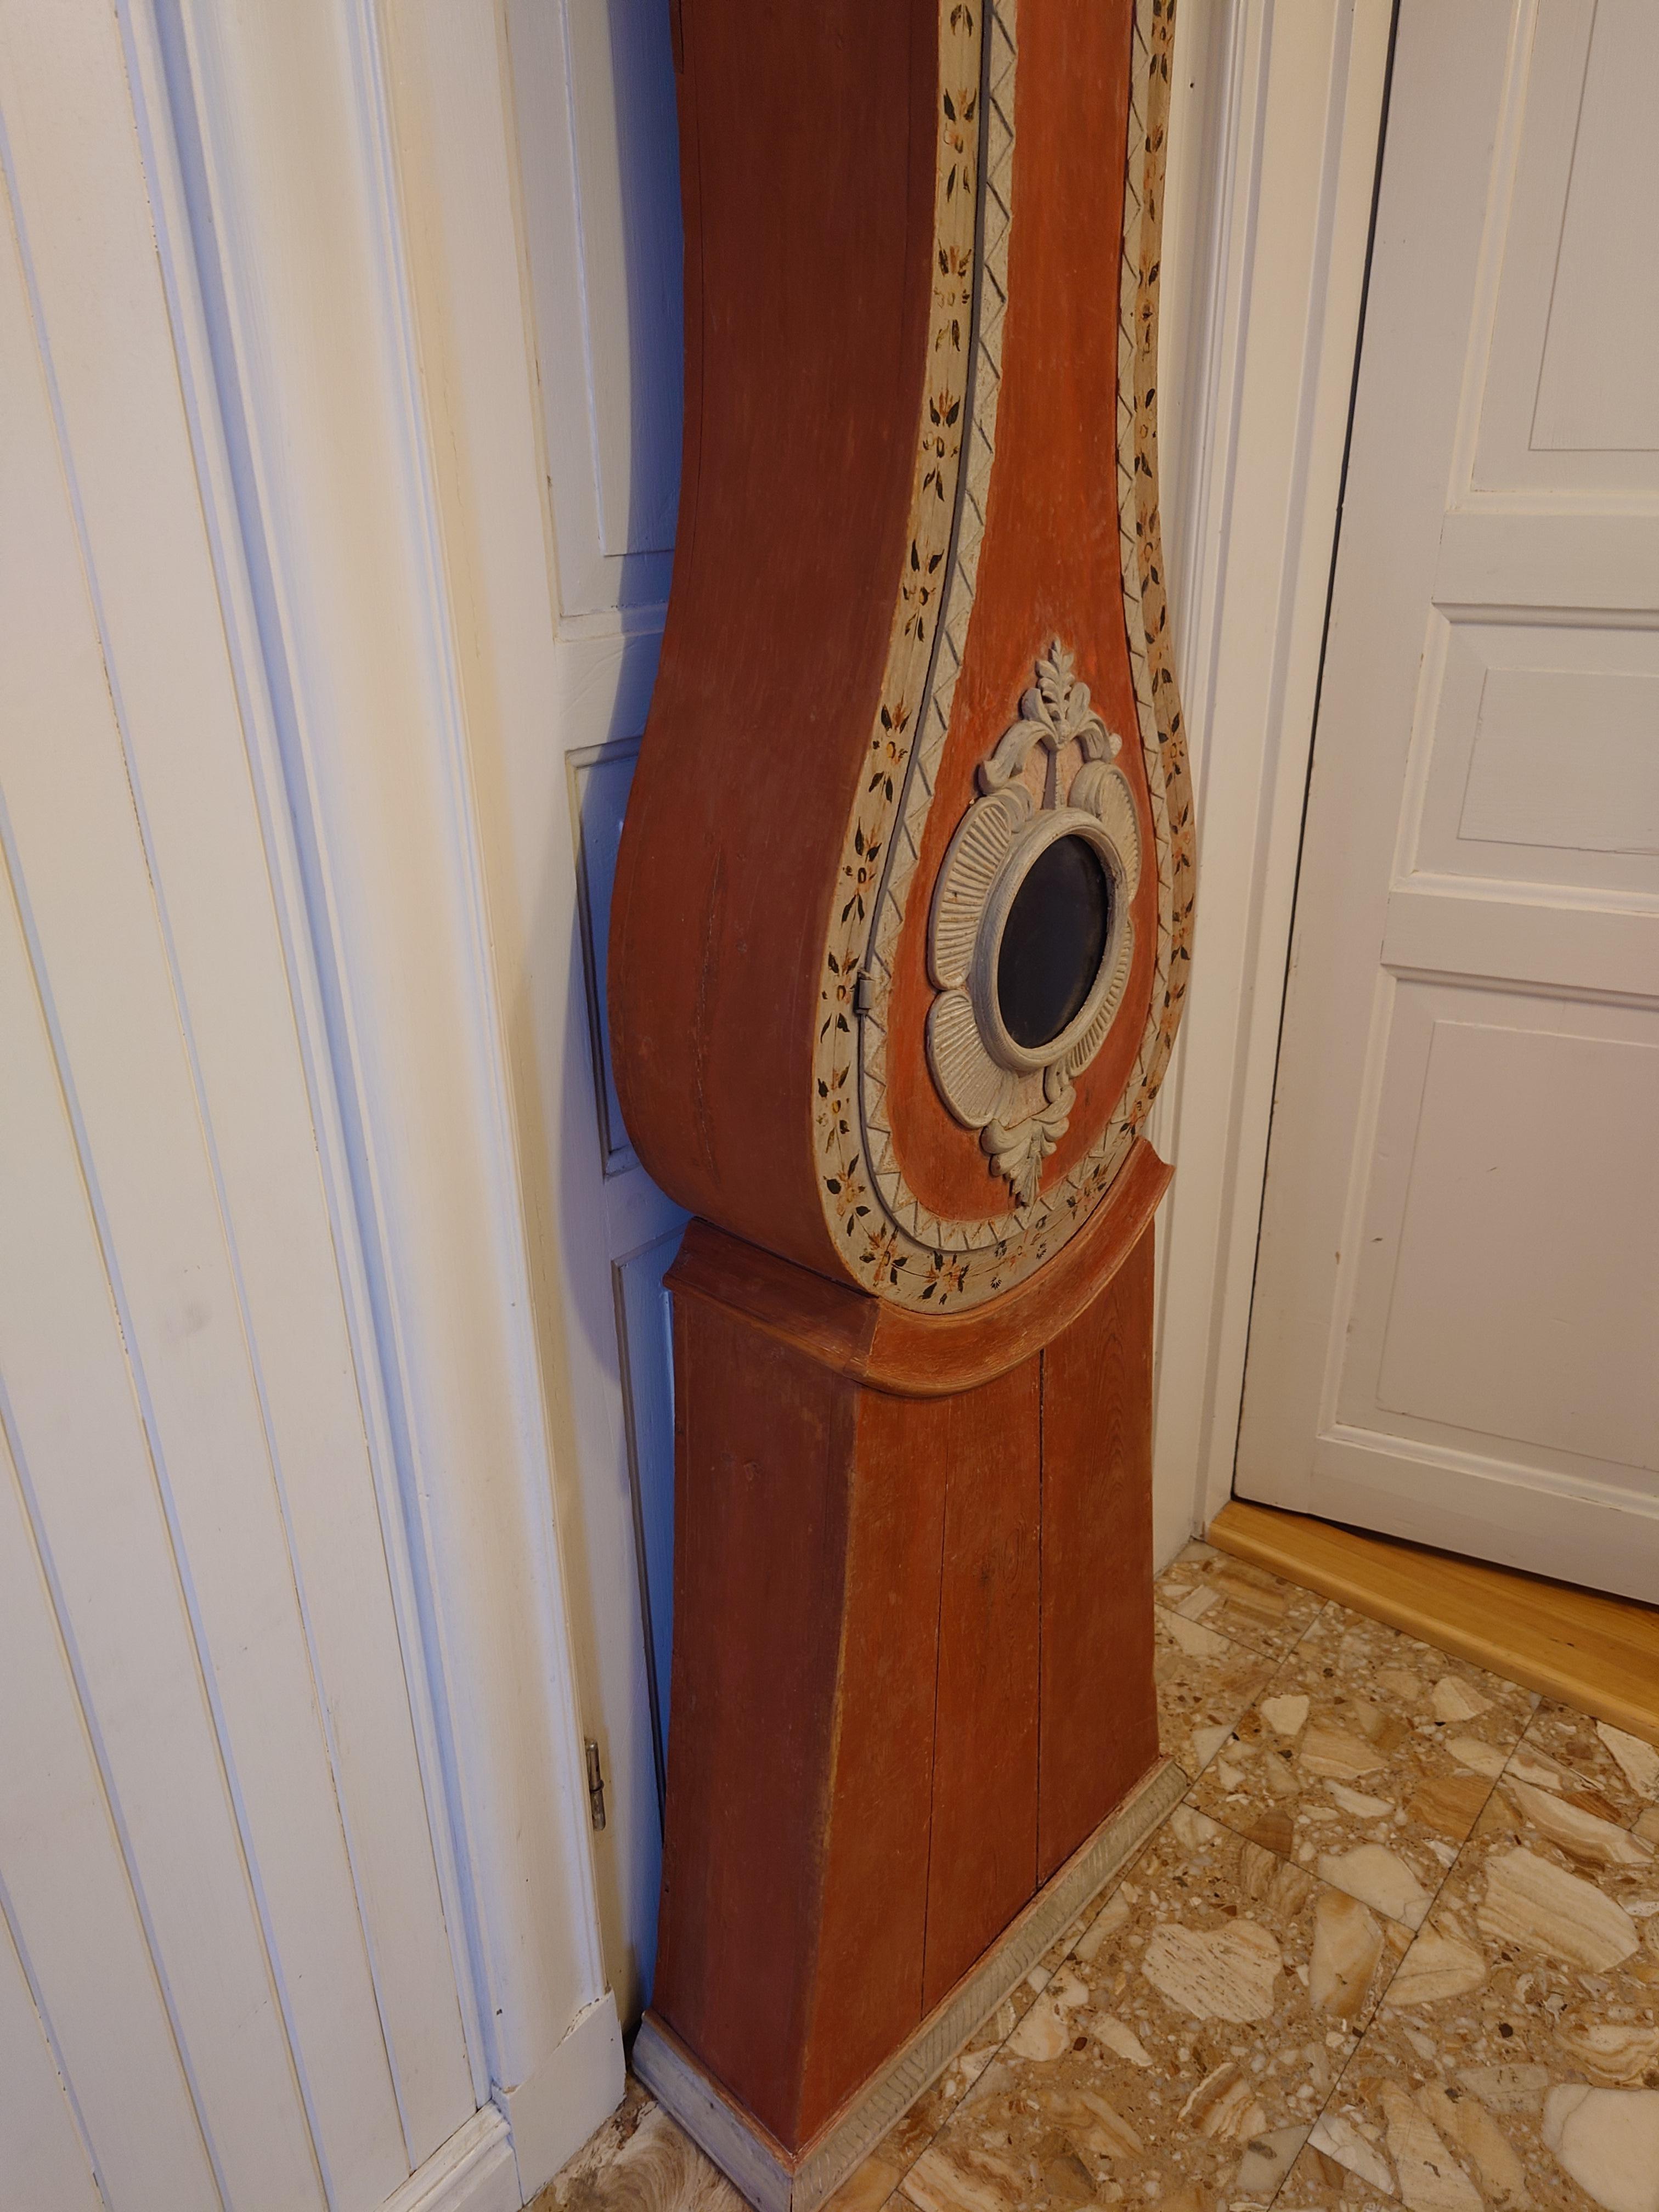 19th Century Swedish Ántique Grandfather Clock Tall Case Clock Original Paint In Good Condition For Sale In Boden, SE